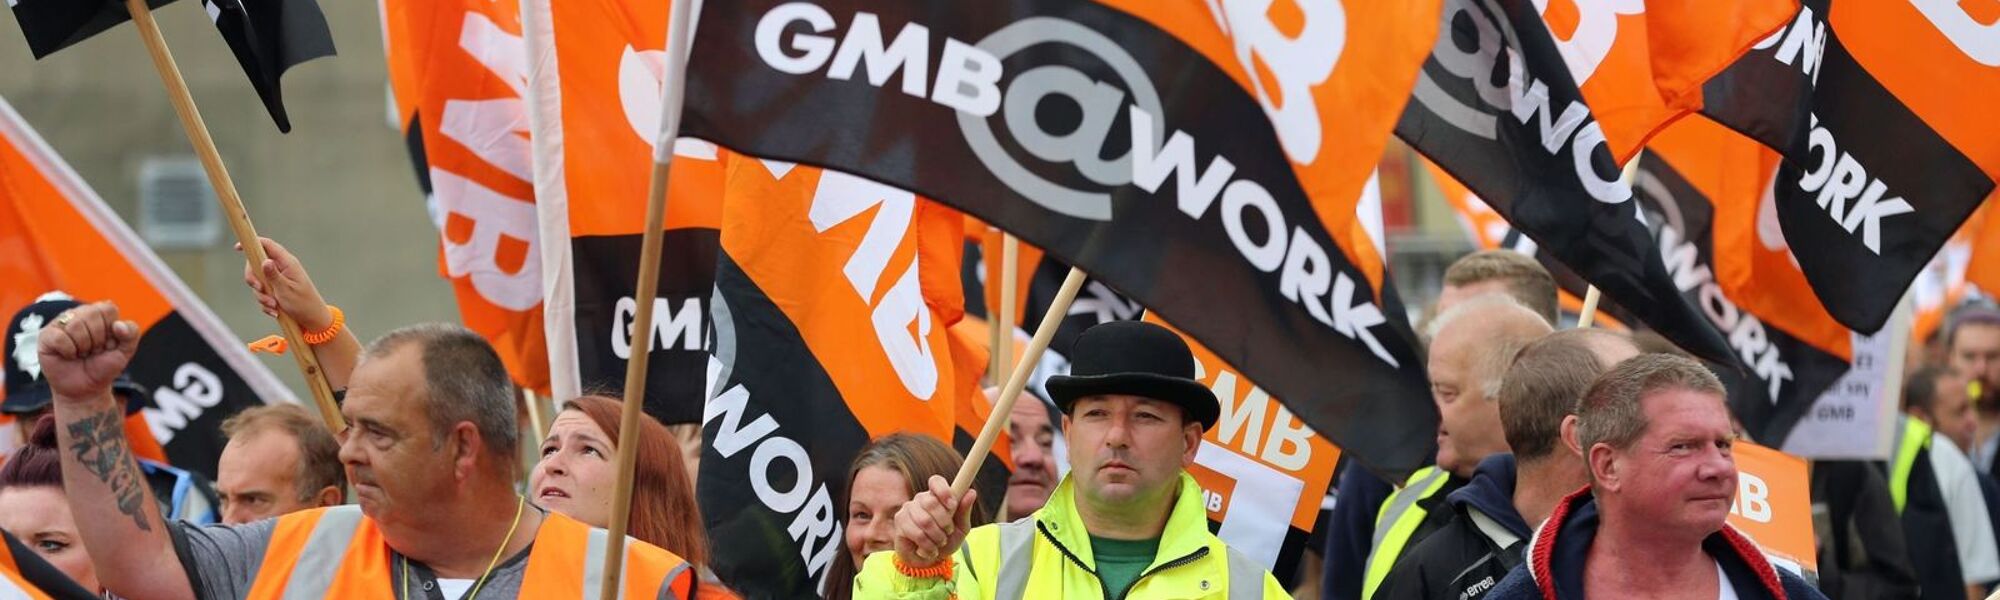 GMB Union - Why Join GMB?